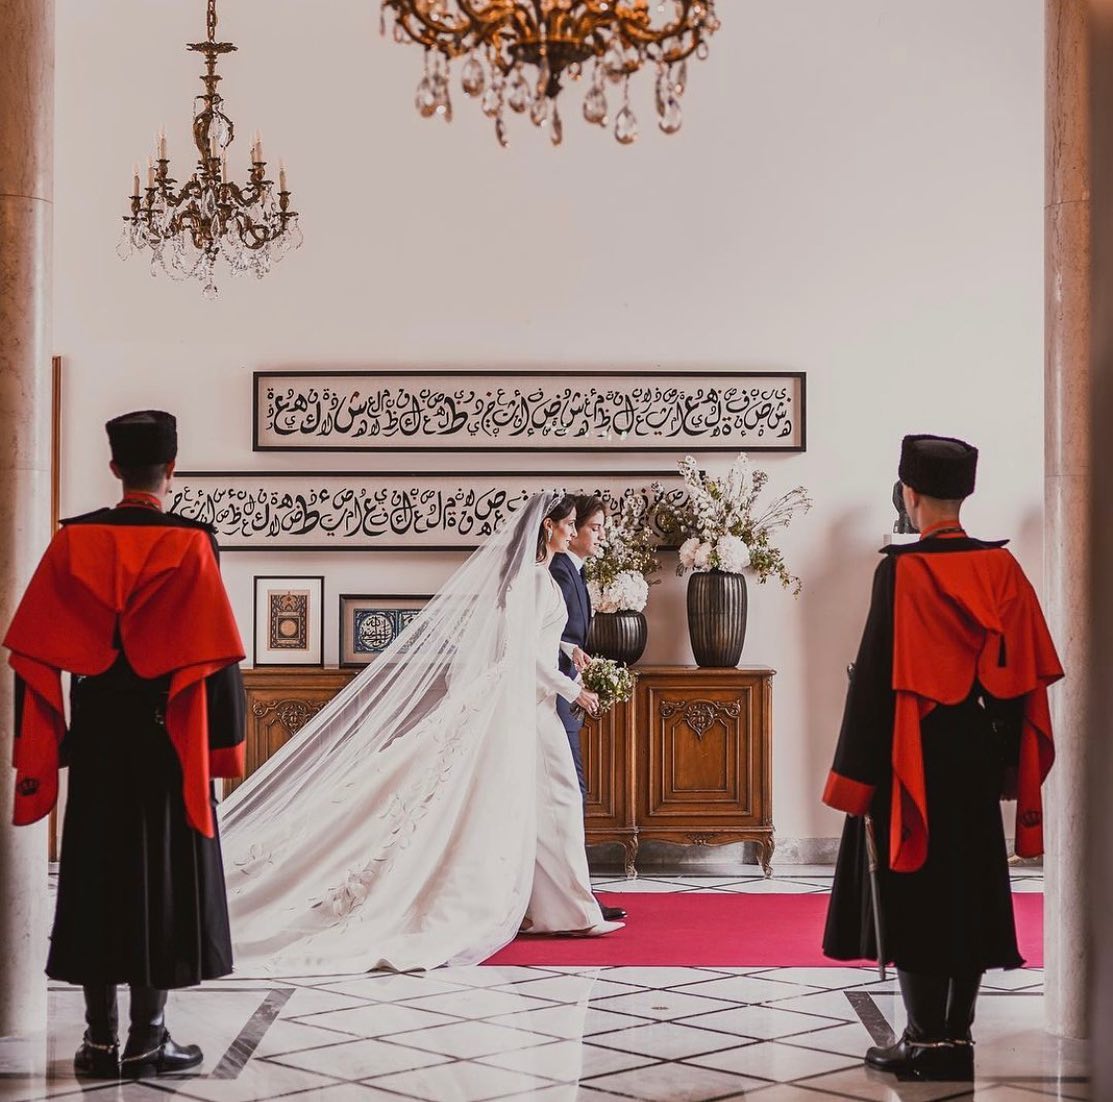 All The Inside Details About The Jordan Royal Wedding!